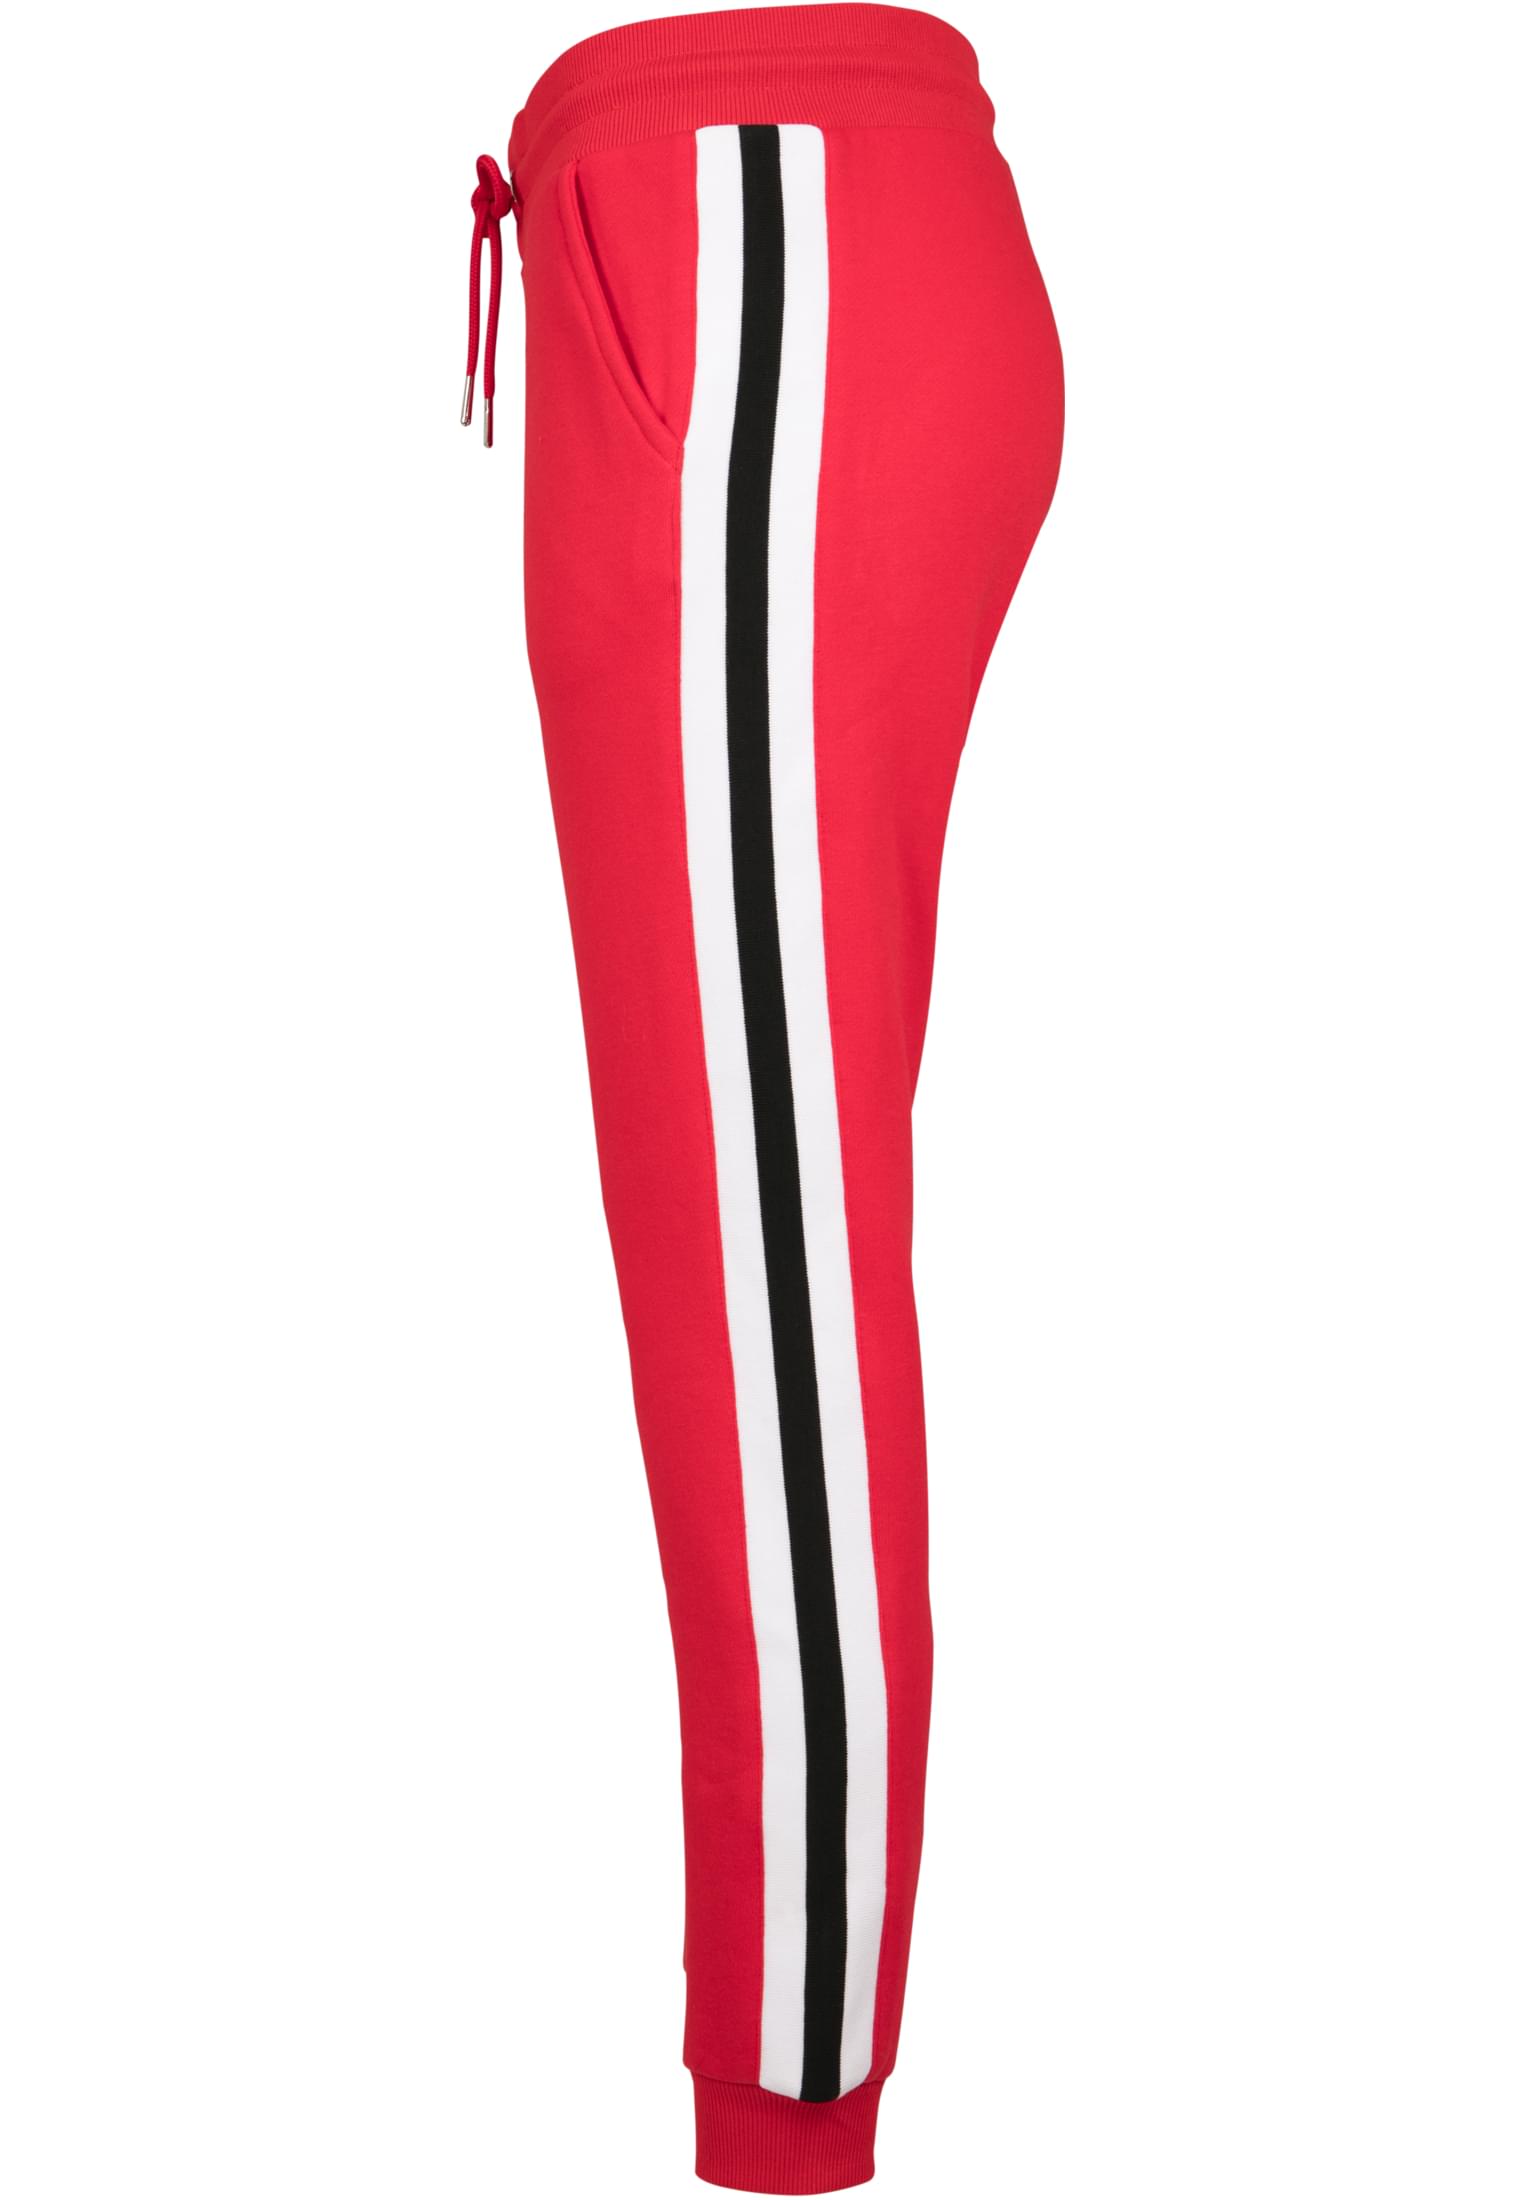 Damen Ladies College Contrast Sweatpants in Farbe firered/wht/blk